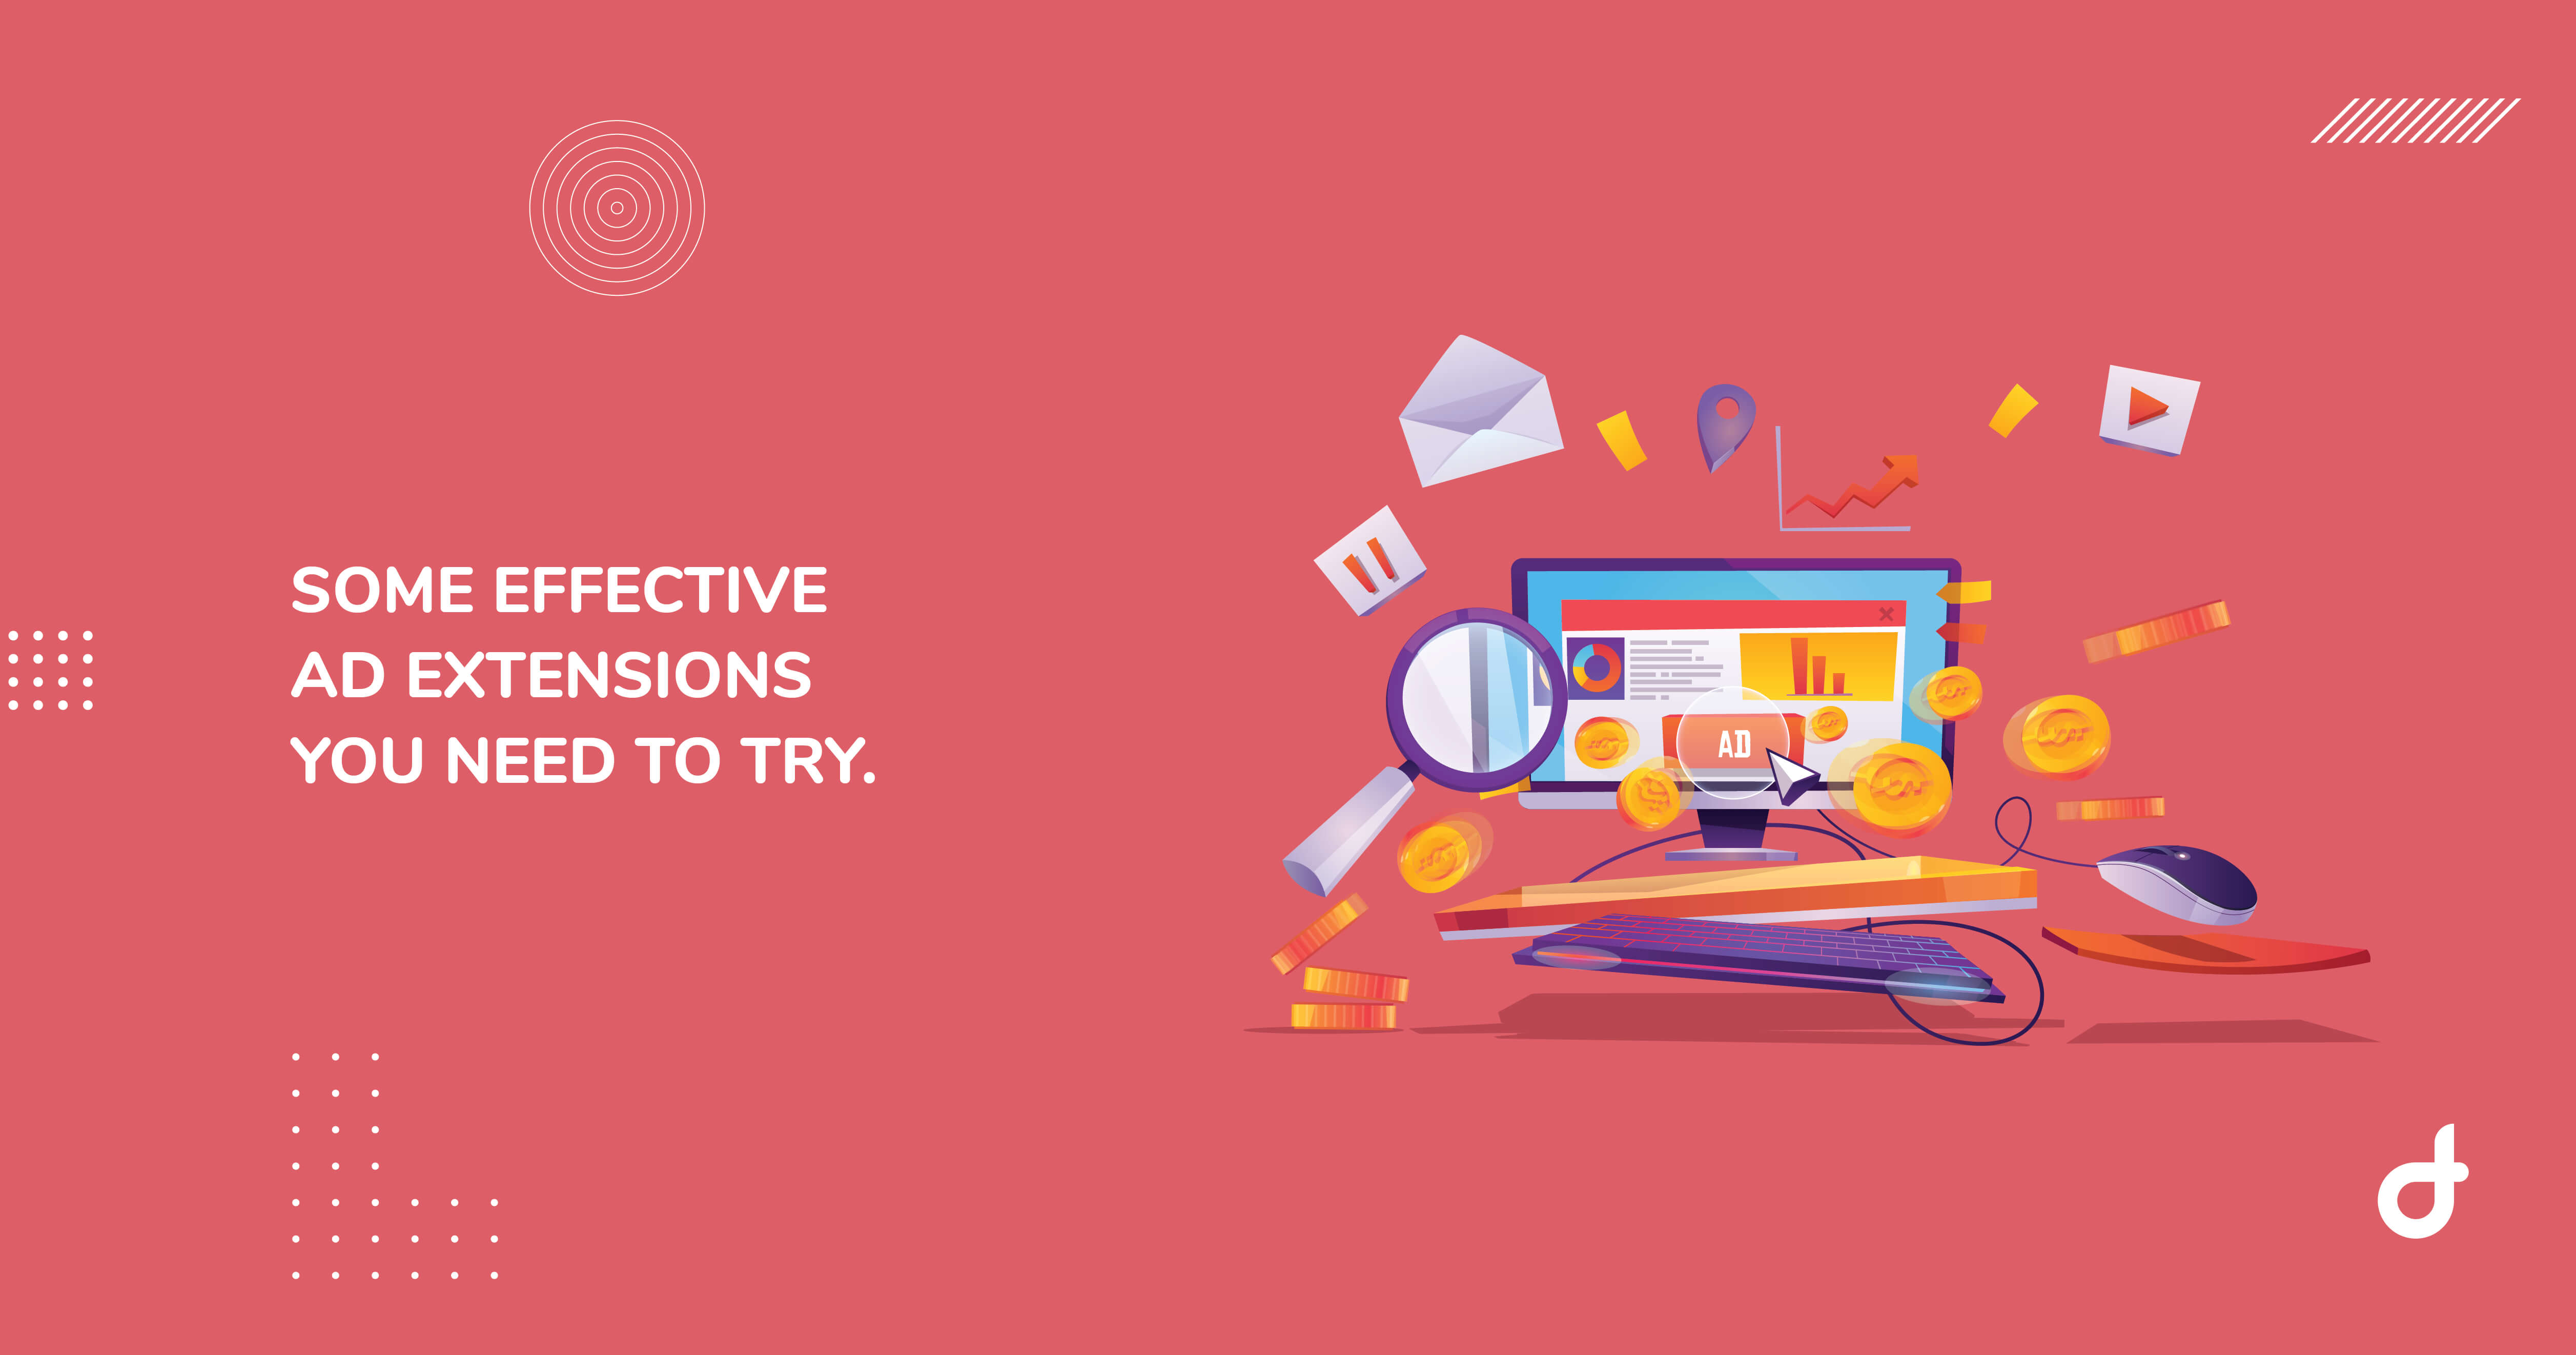 Some Effective Ad Extensions You Need to Try